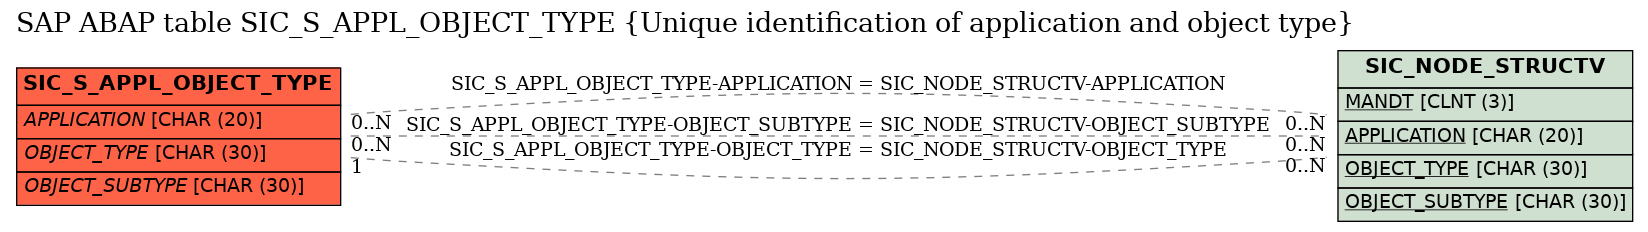 E-R Diagram for table SIC_S_APPL_OBJECT_TYPE (Unique identification of application and object type)